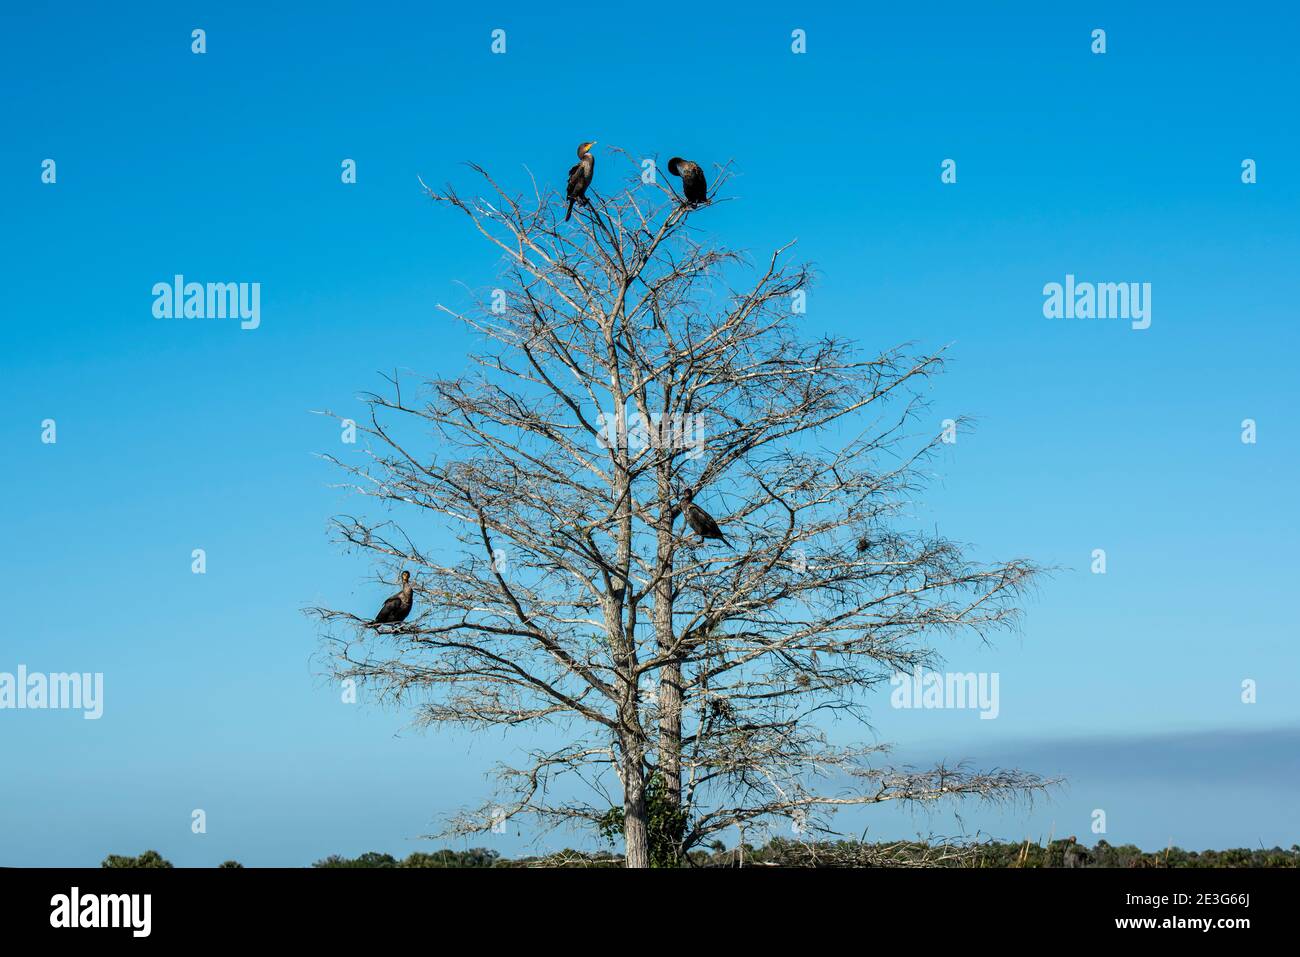 Florida. Four Anhingas sitting in a barren tree in the everglades soaking up the sun. Stock Photo